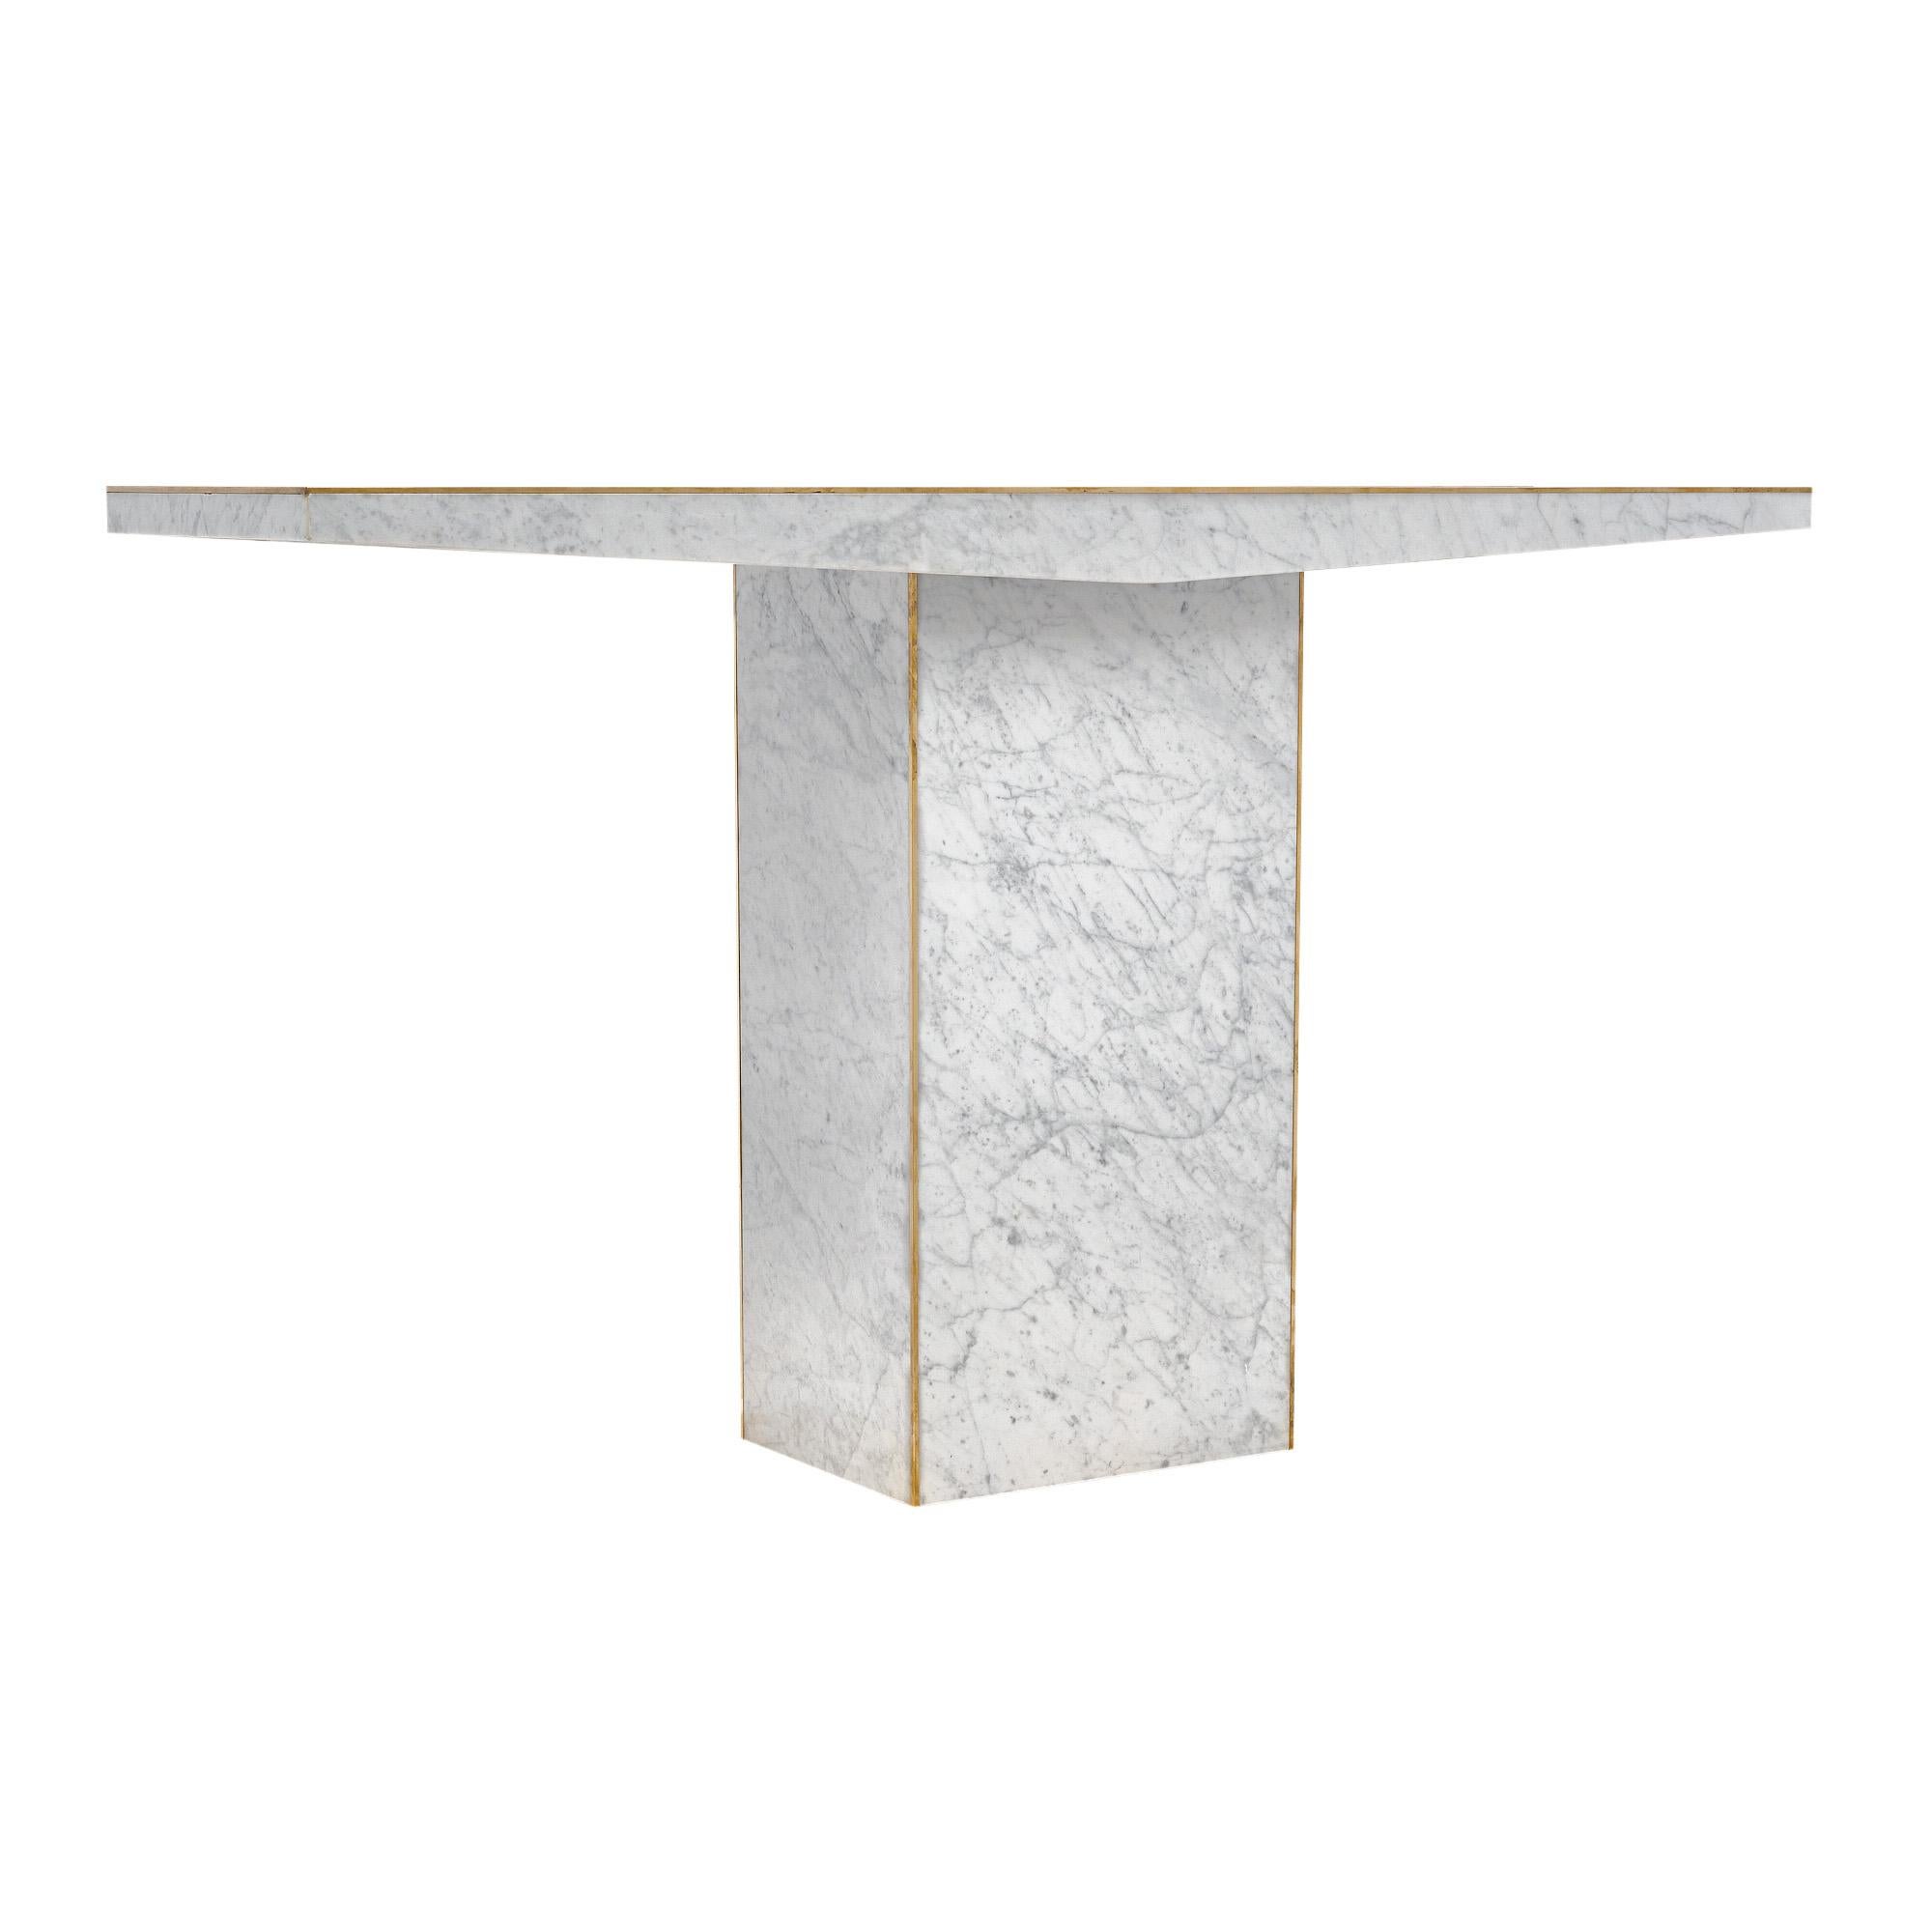 Pair of console tables from Italy in the mid-century style. Each table has a rectangular base with a stylized one piece Carrara slab top. Brass trim can be found throughout for a glamorous touch. The price is for the pair, per piece they are priced